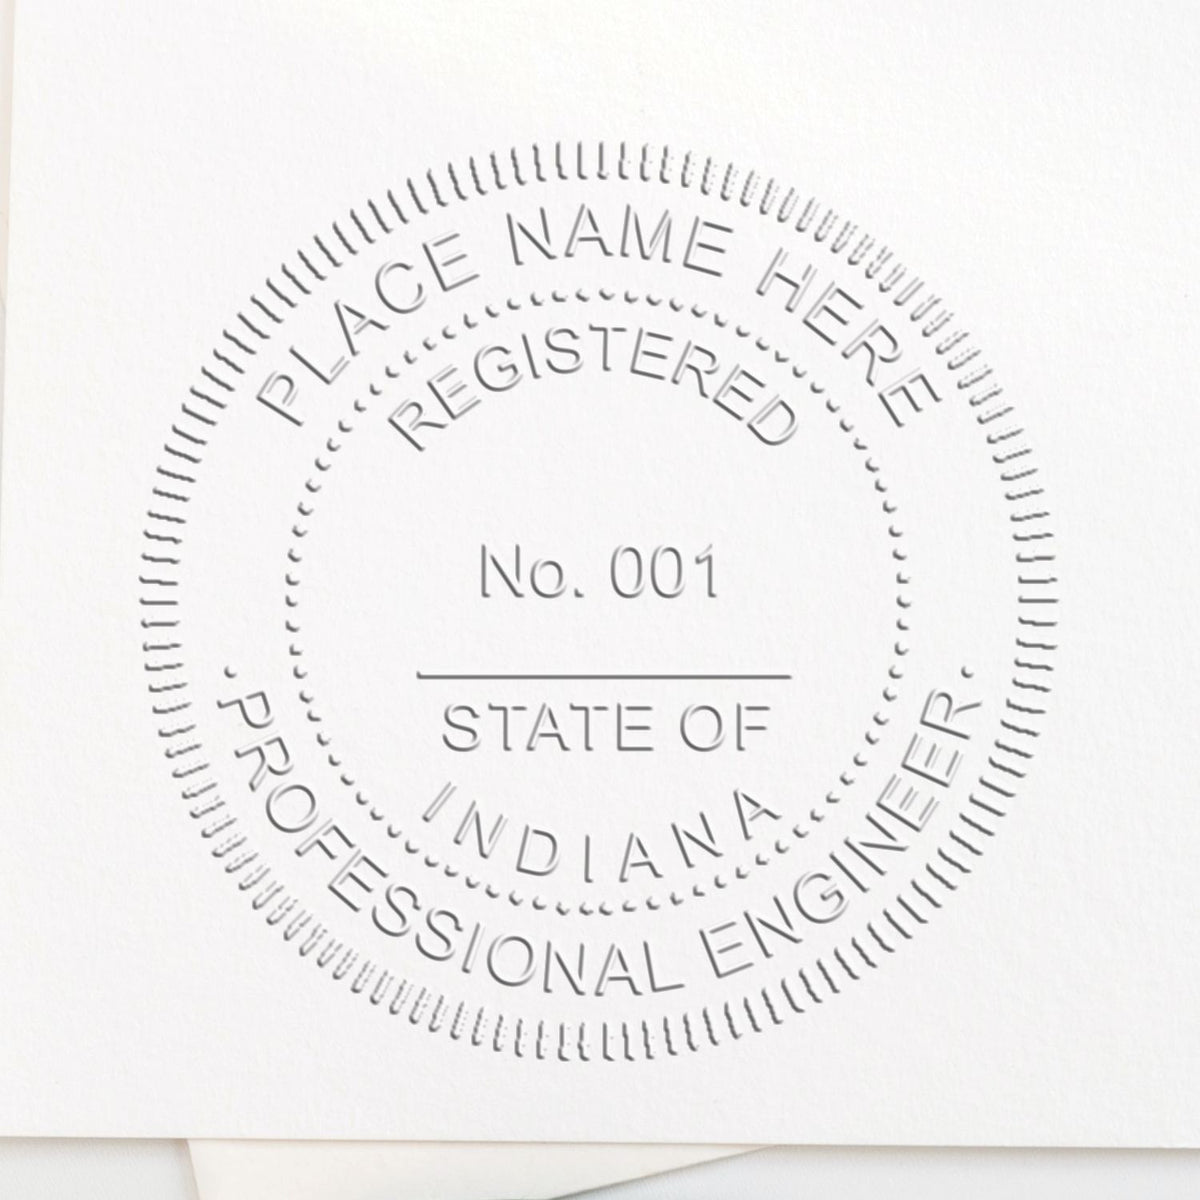 The Gift Indiana Engineer Seal stamp impression comes to life with a crisp, detailed image stamped on paper - showcasing true professional quality.